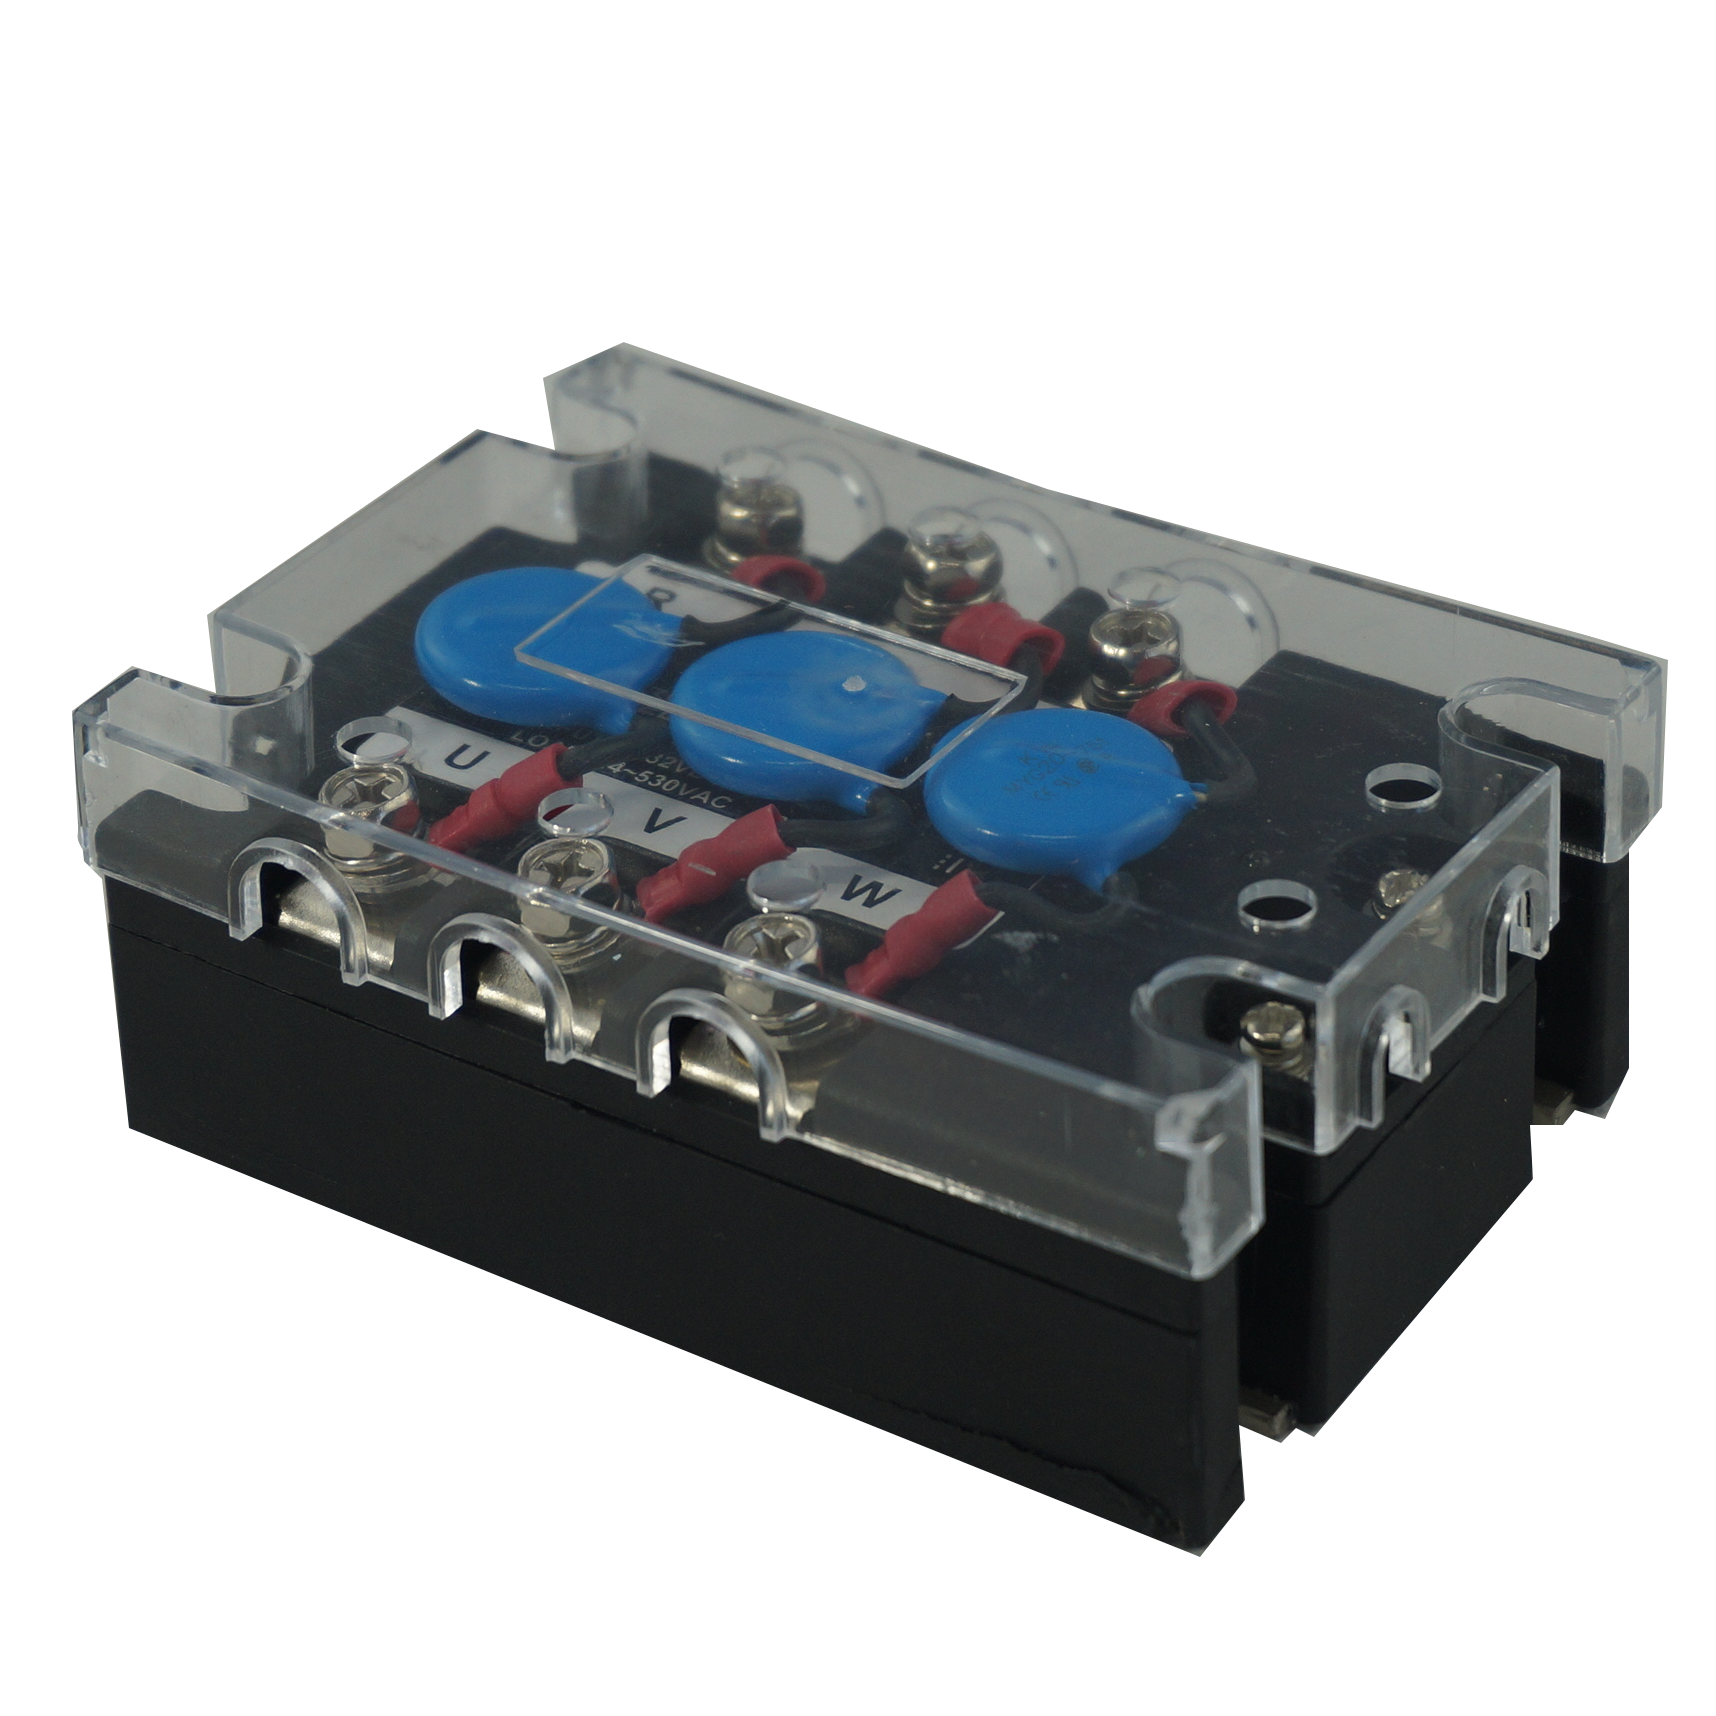 FTH12053ZD3-P, Solid State Relay, 3 Phase 4-32VDC Control, 120A, 70-530VAC Load w/ Varistors, with IP20 Cover